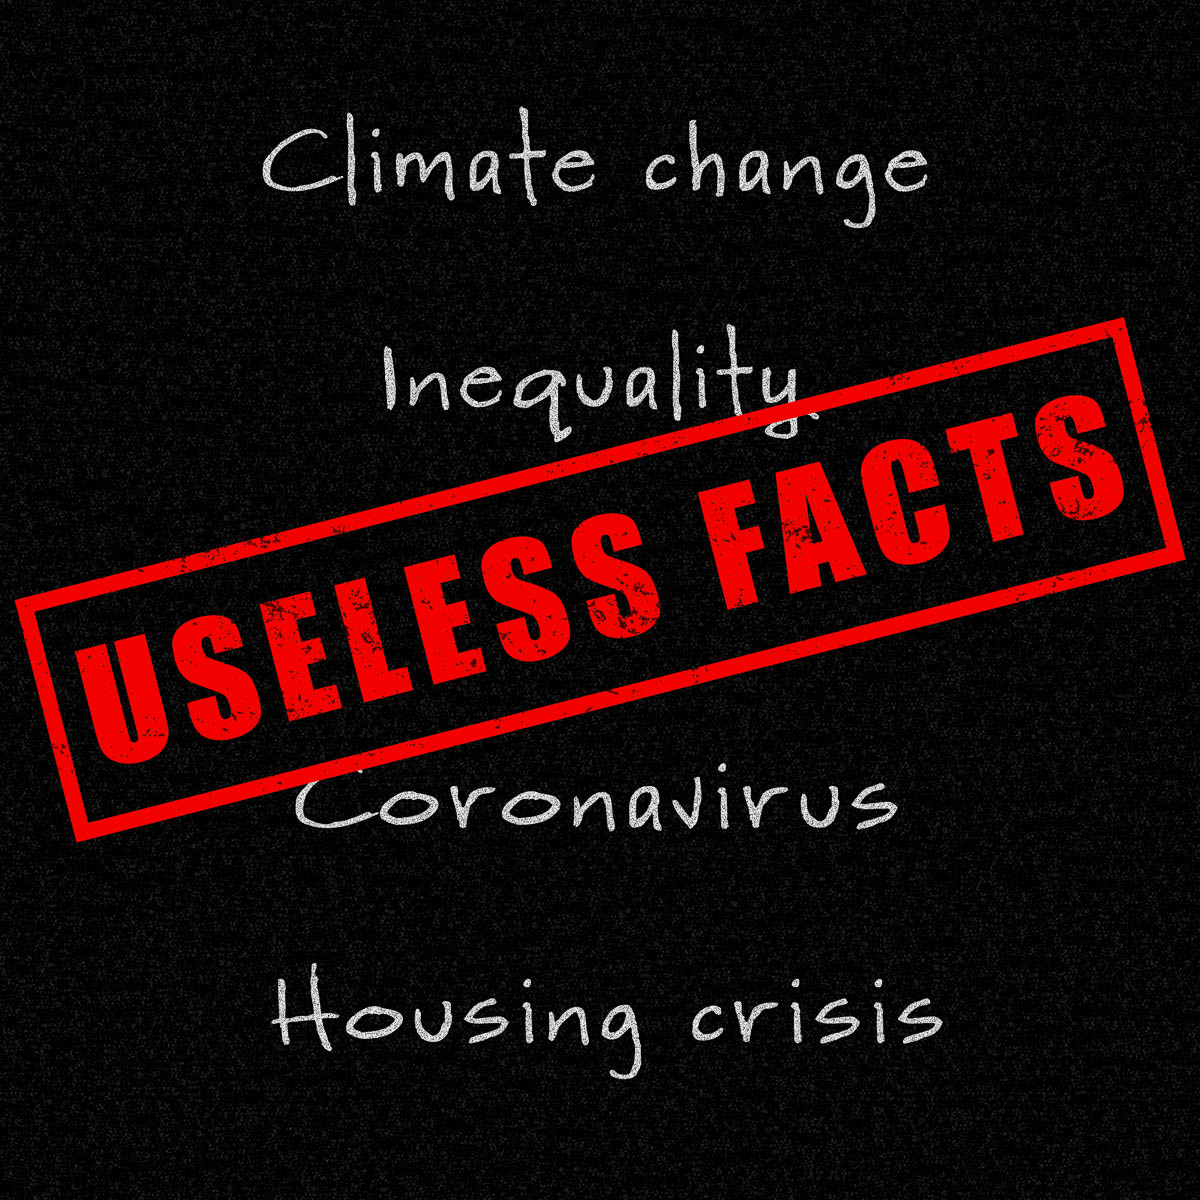 Useless Facts red stamp on real world facts